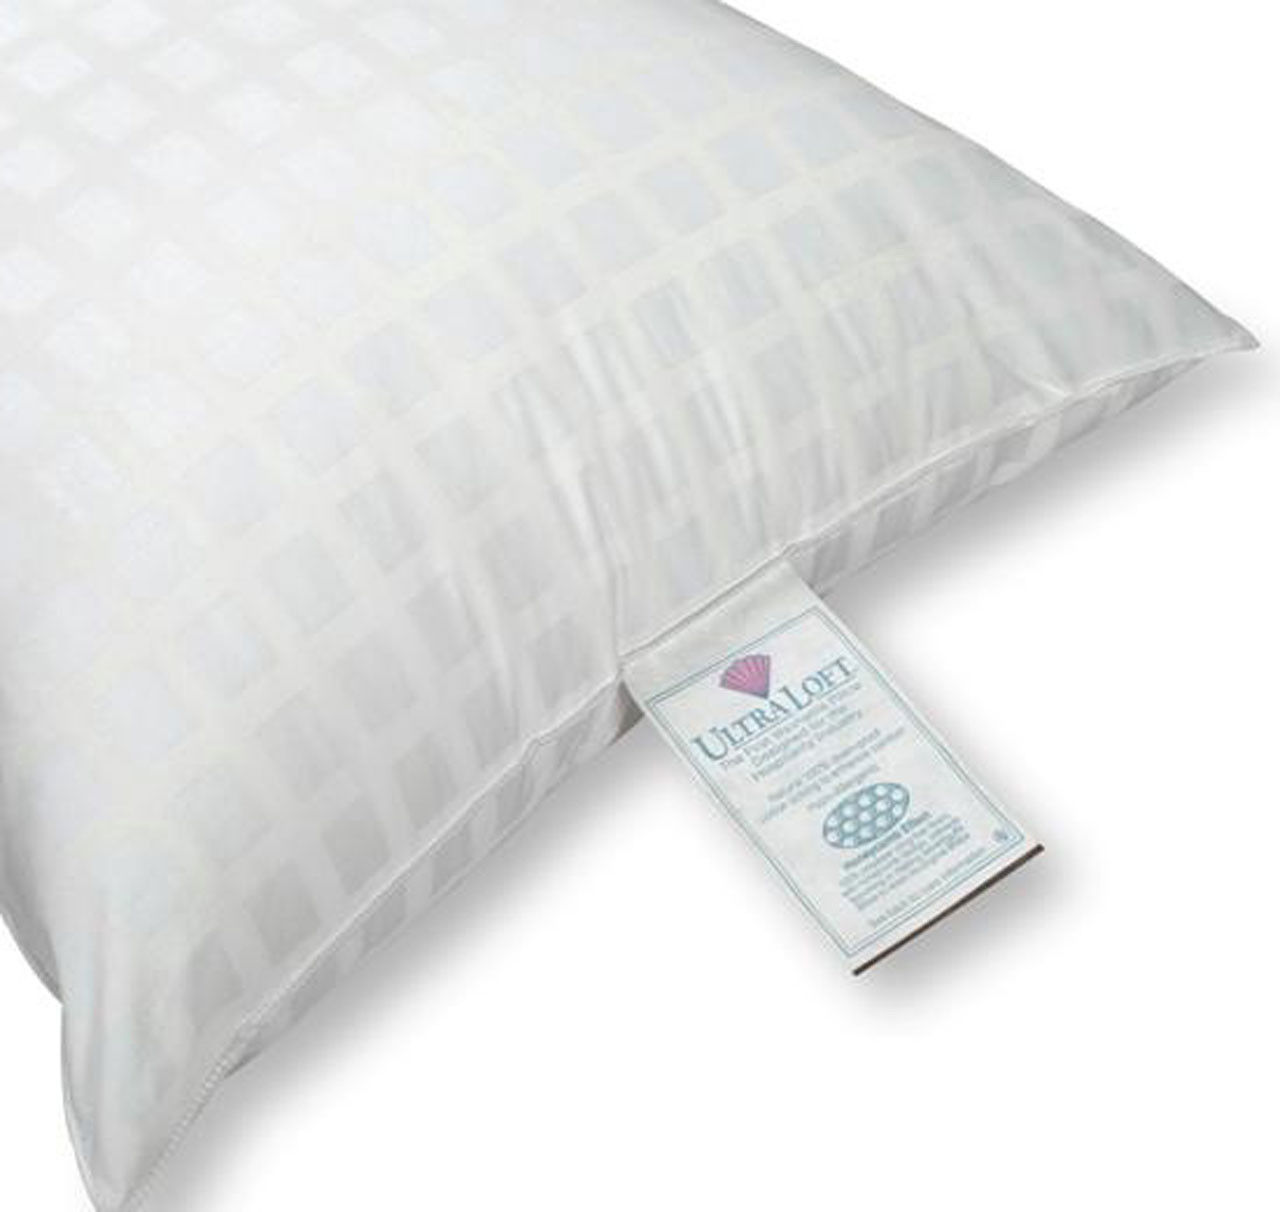 Is the UltraLoft Pillow the first washable pillow designed for the Hospitality Industry?